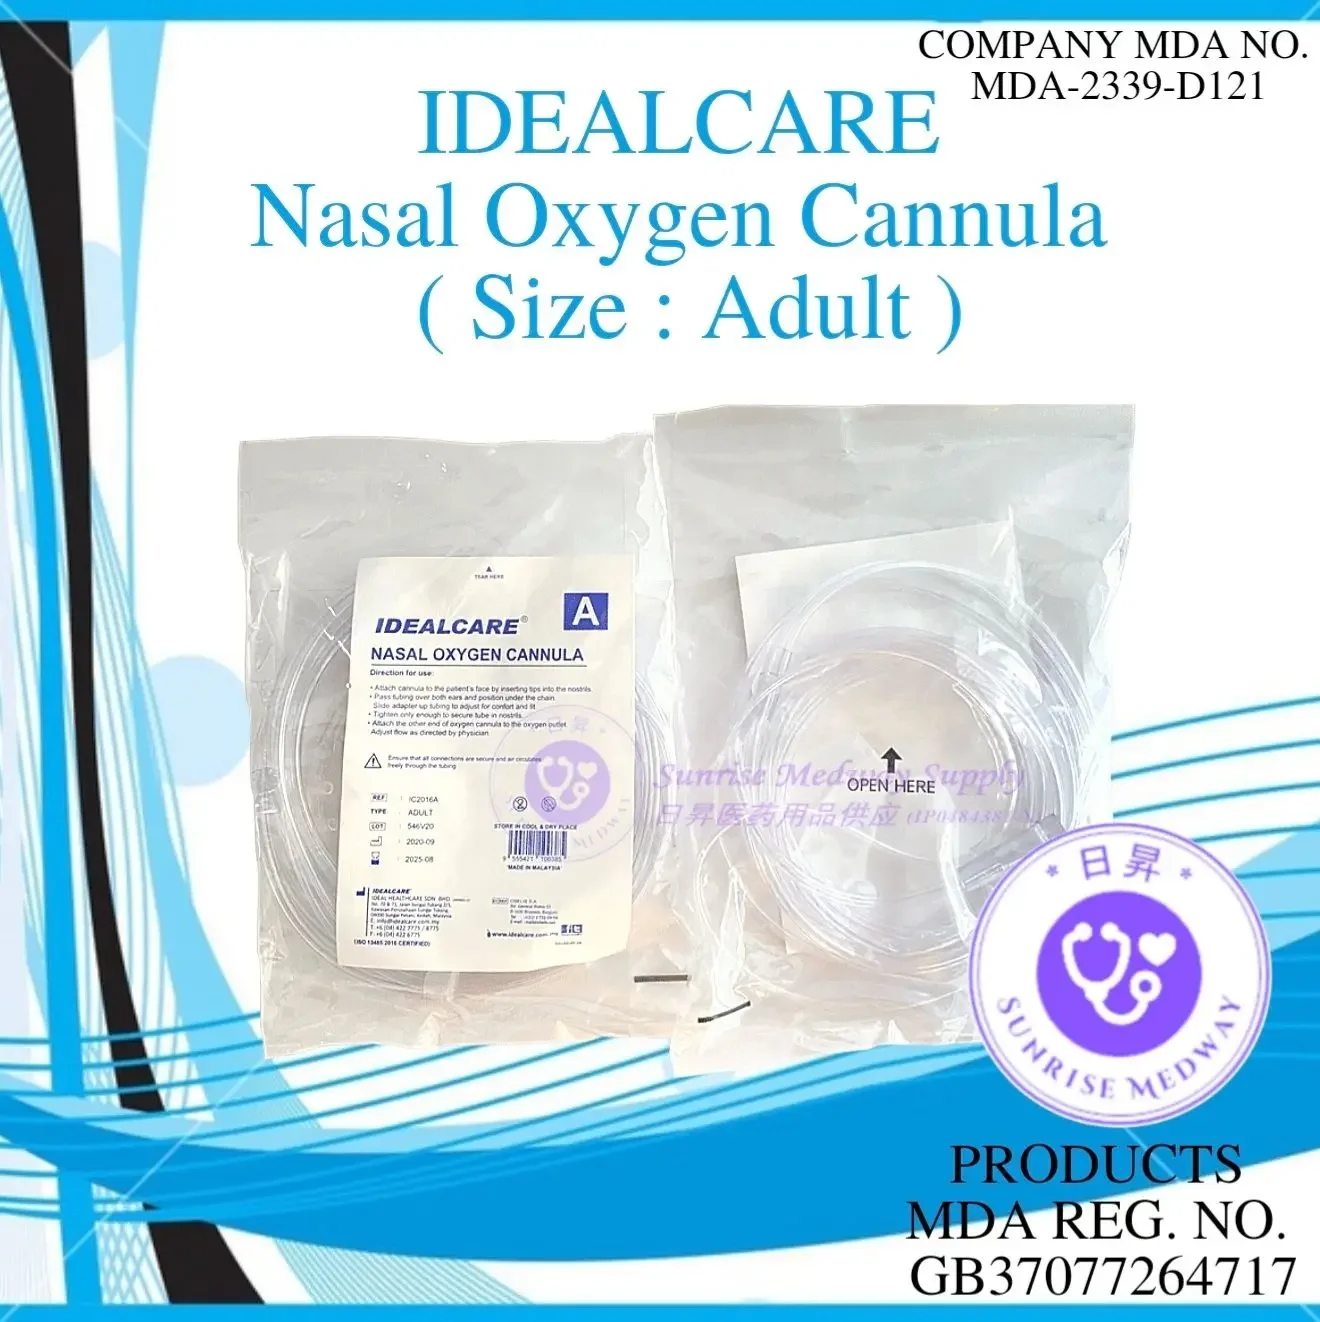 IDEALCARE Nasal Oxygen Cannula, Adult, 1 pc/pkt